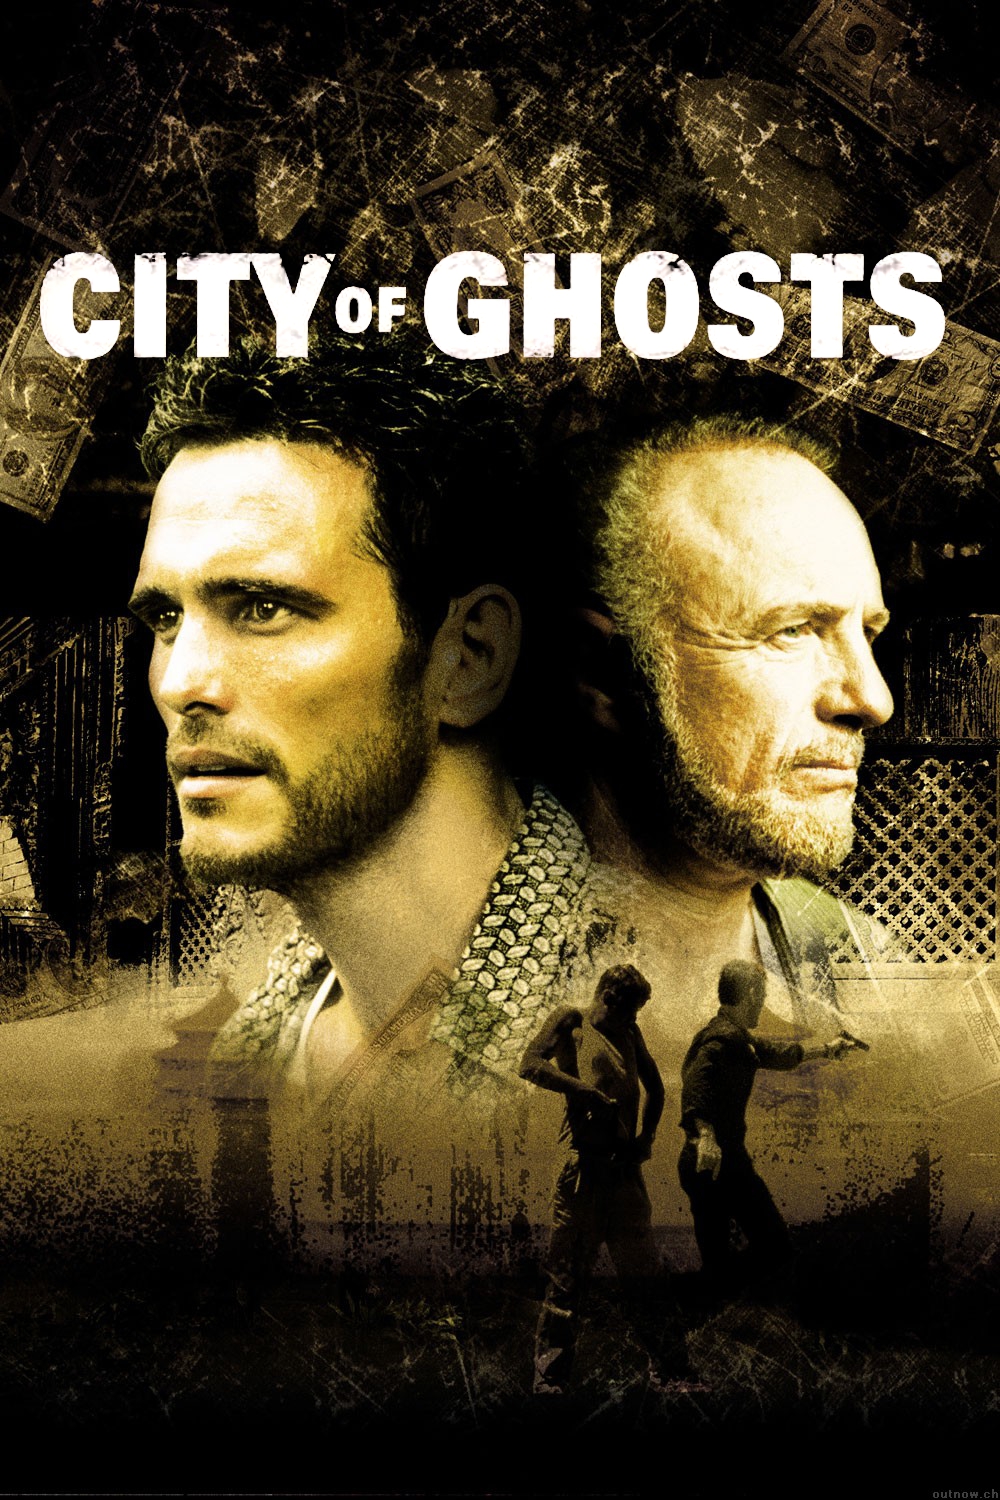 City of Ghosts [HD] (2002)